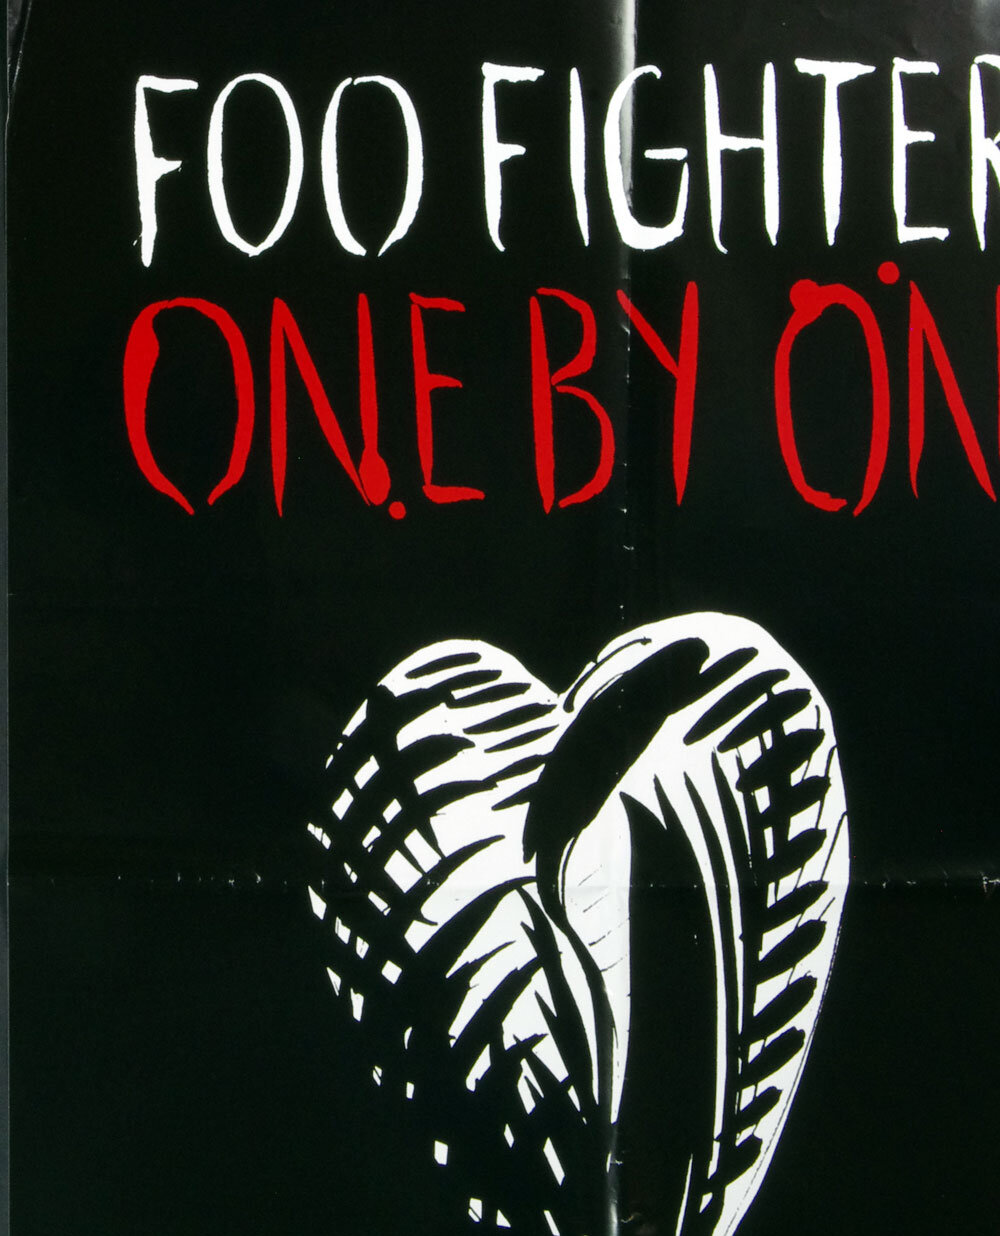 Foo Fighter Poster 2002  One by One CD DVD Set Release Promotion